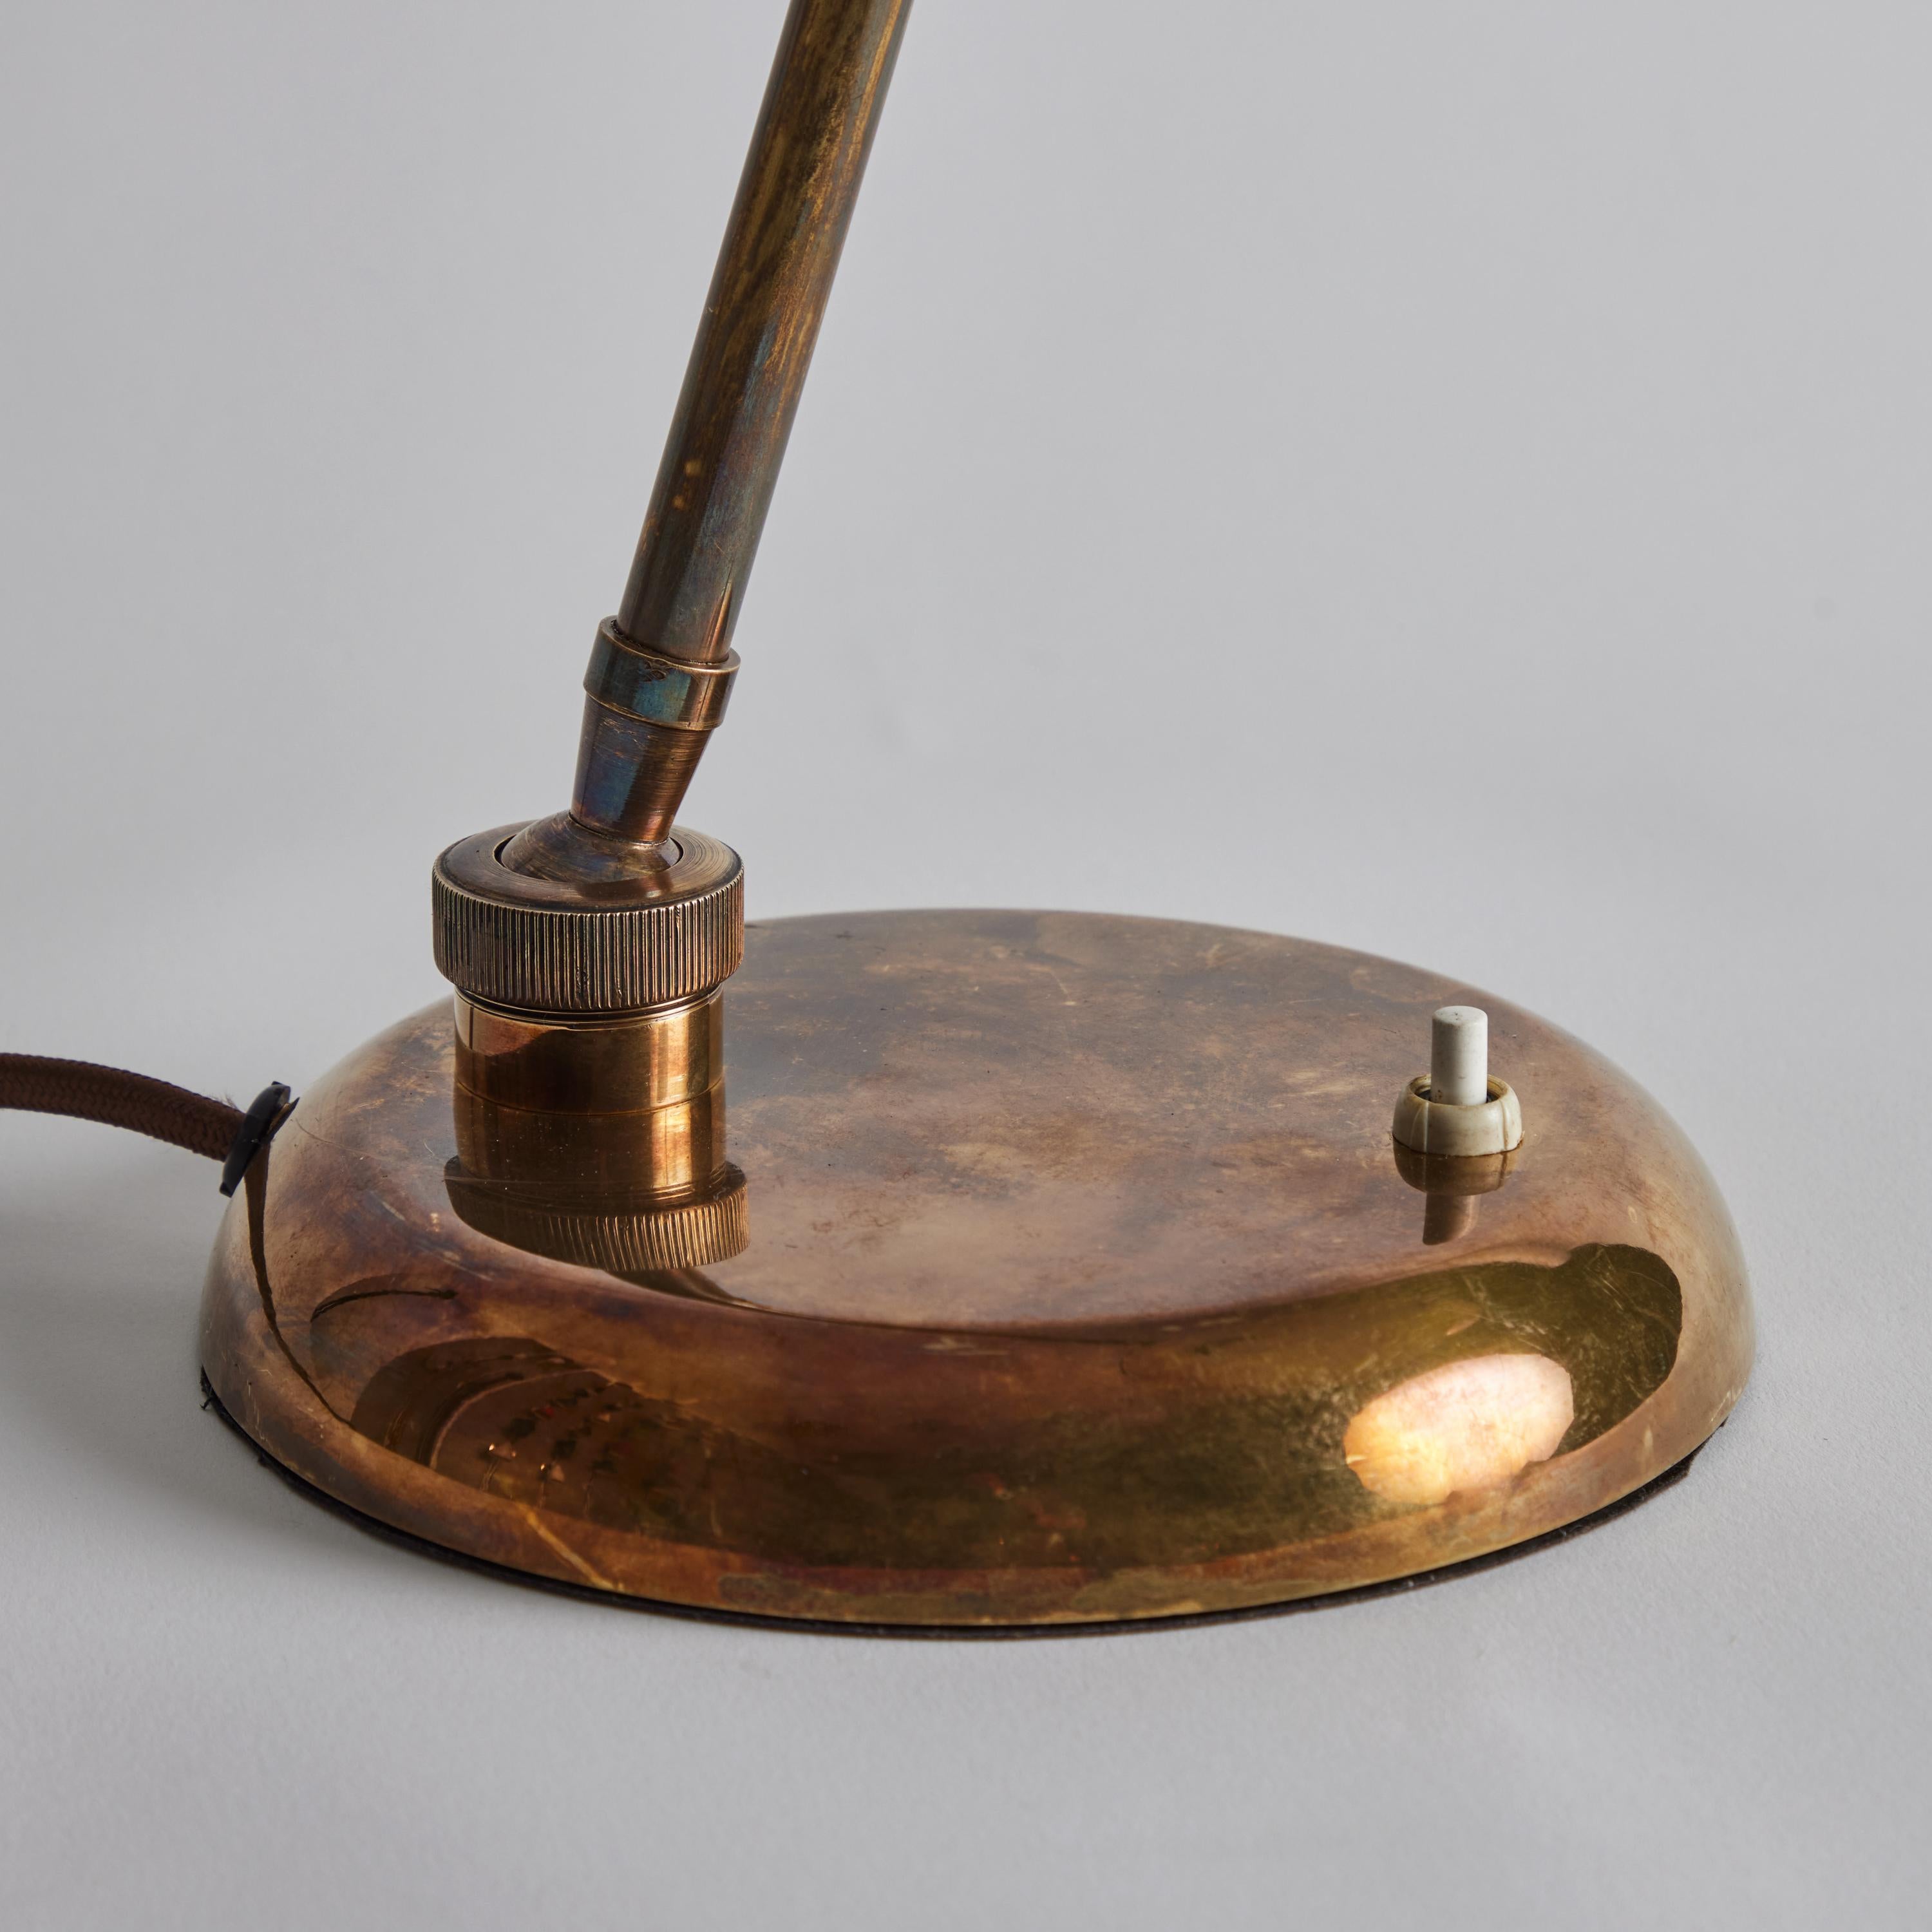 Scandinavian Modern 1940s Giovanni Michelucci Patinated Brass Ministerial Table Lamp for Lariolux